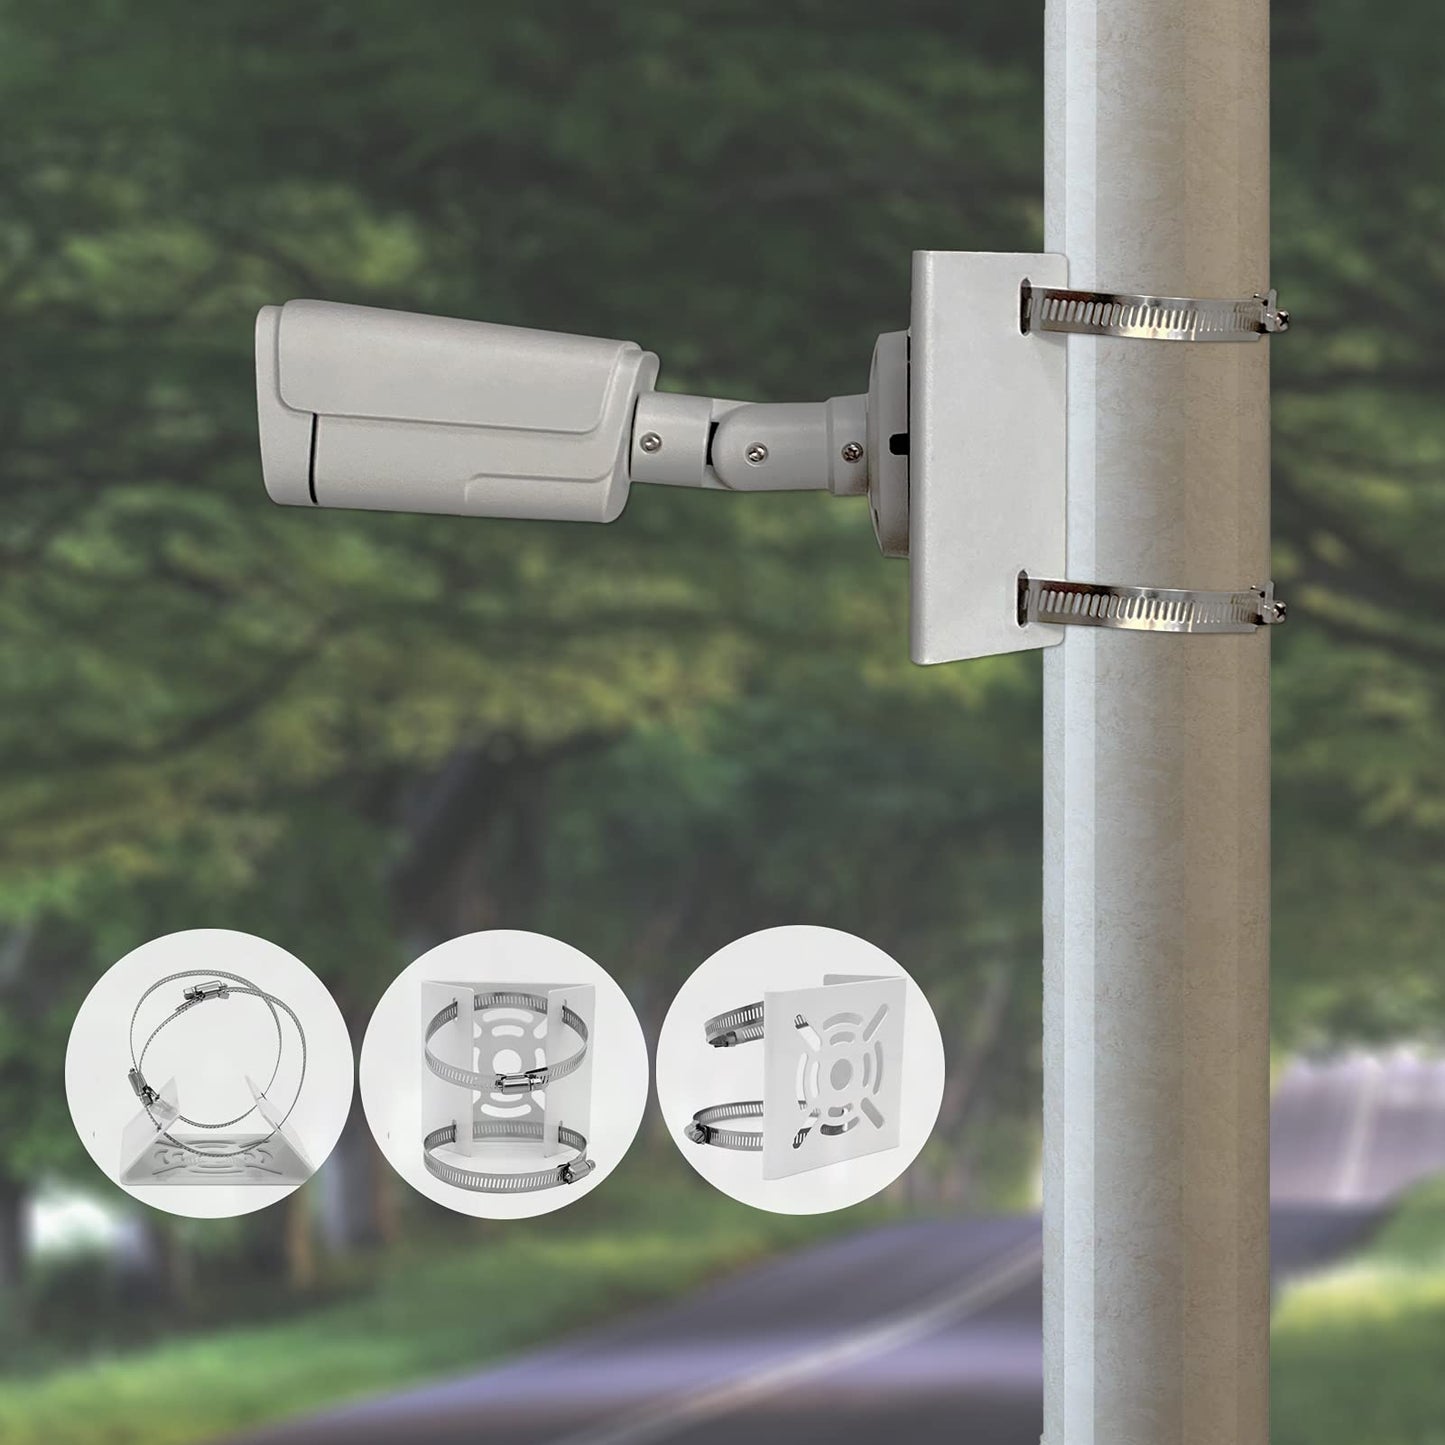 WiTi Universal Vertical Pole Mount for Security Camera, Solid Metal Bracket with Loops, Suitable for CCTV Cameras(Small Size)